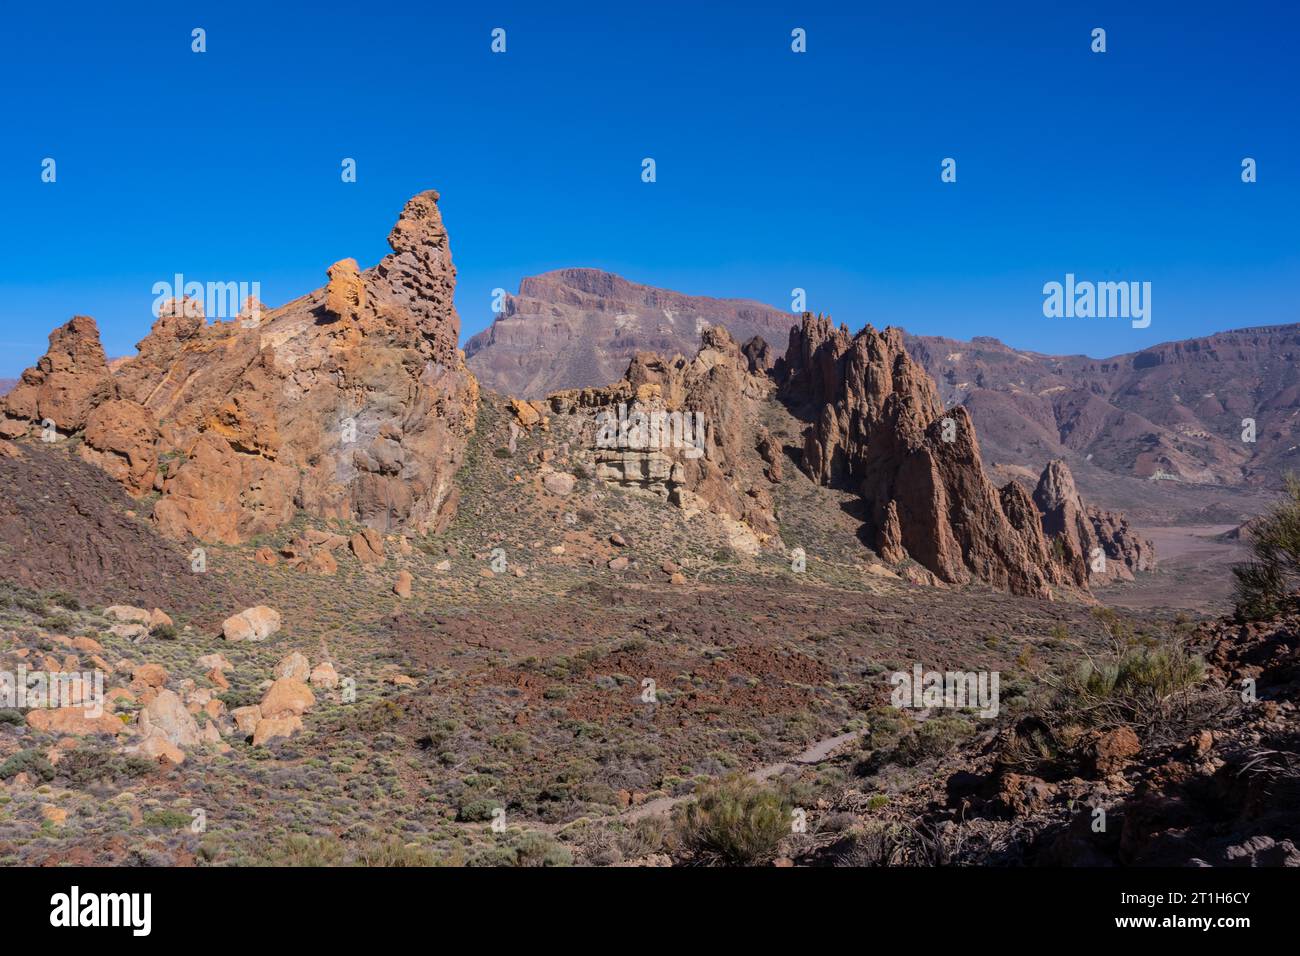 Downhill path in the Roques de Gracia and the Roque Cinchado in the natural area of Teide in Tenerife, Canary Islands Stock Photo